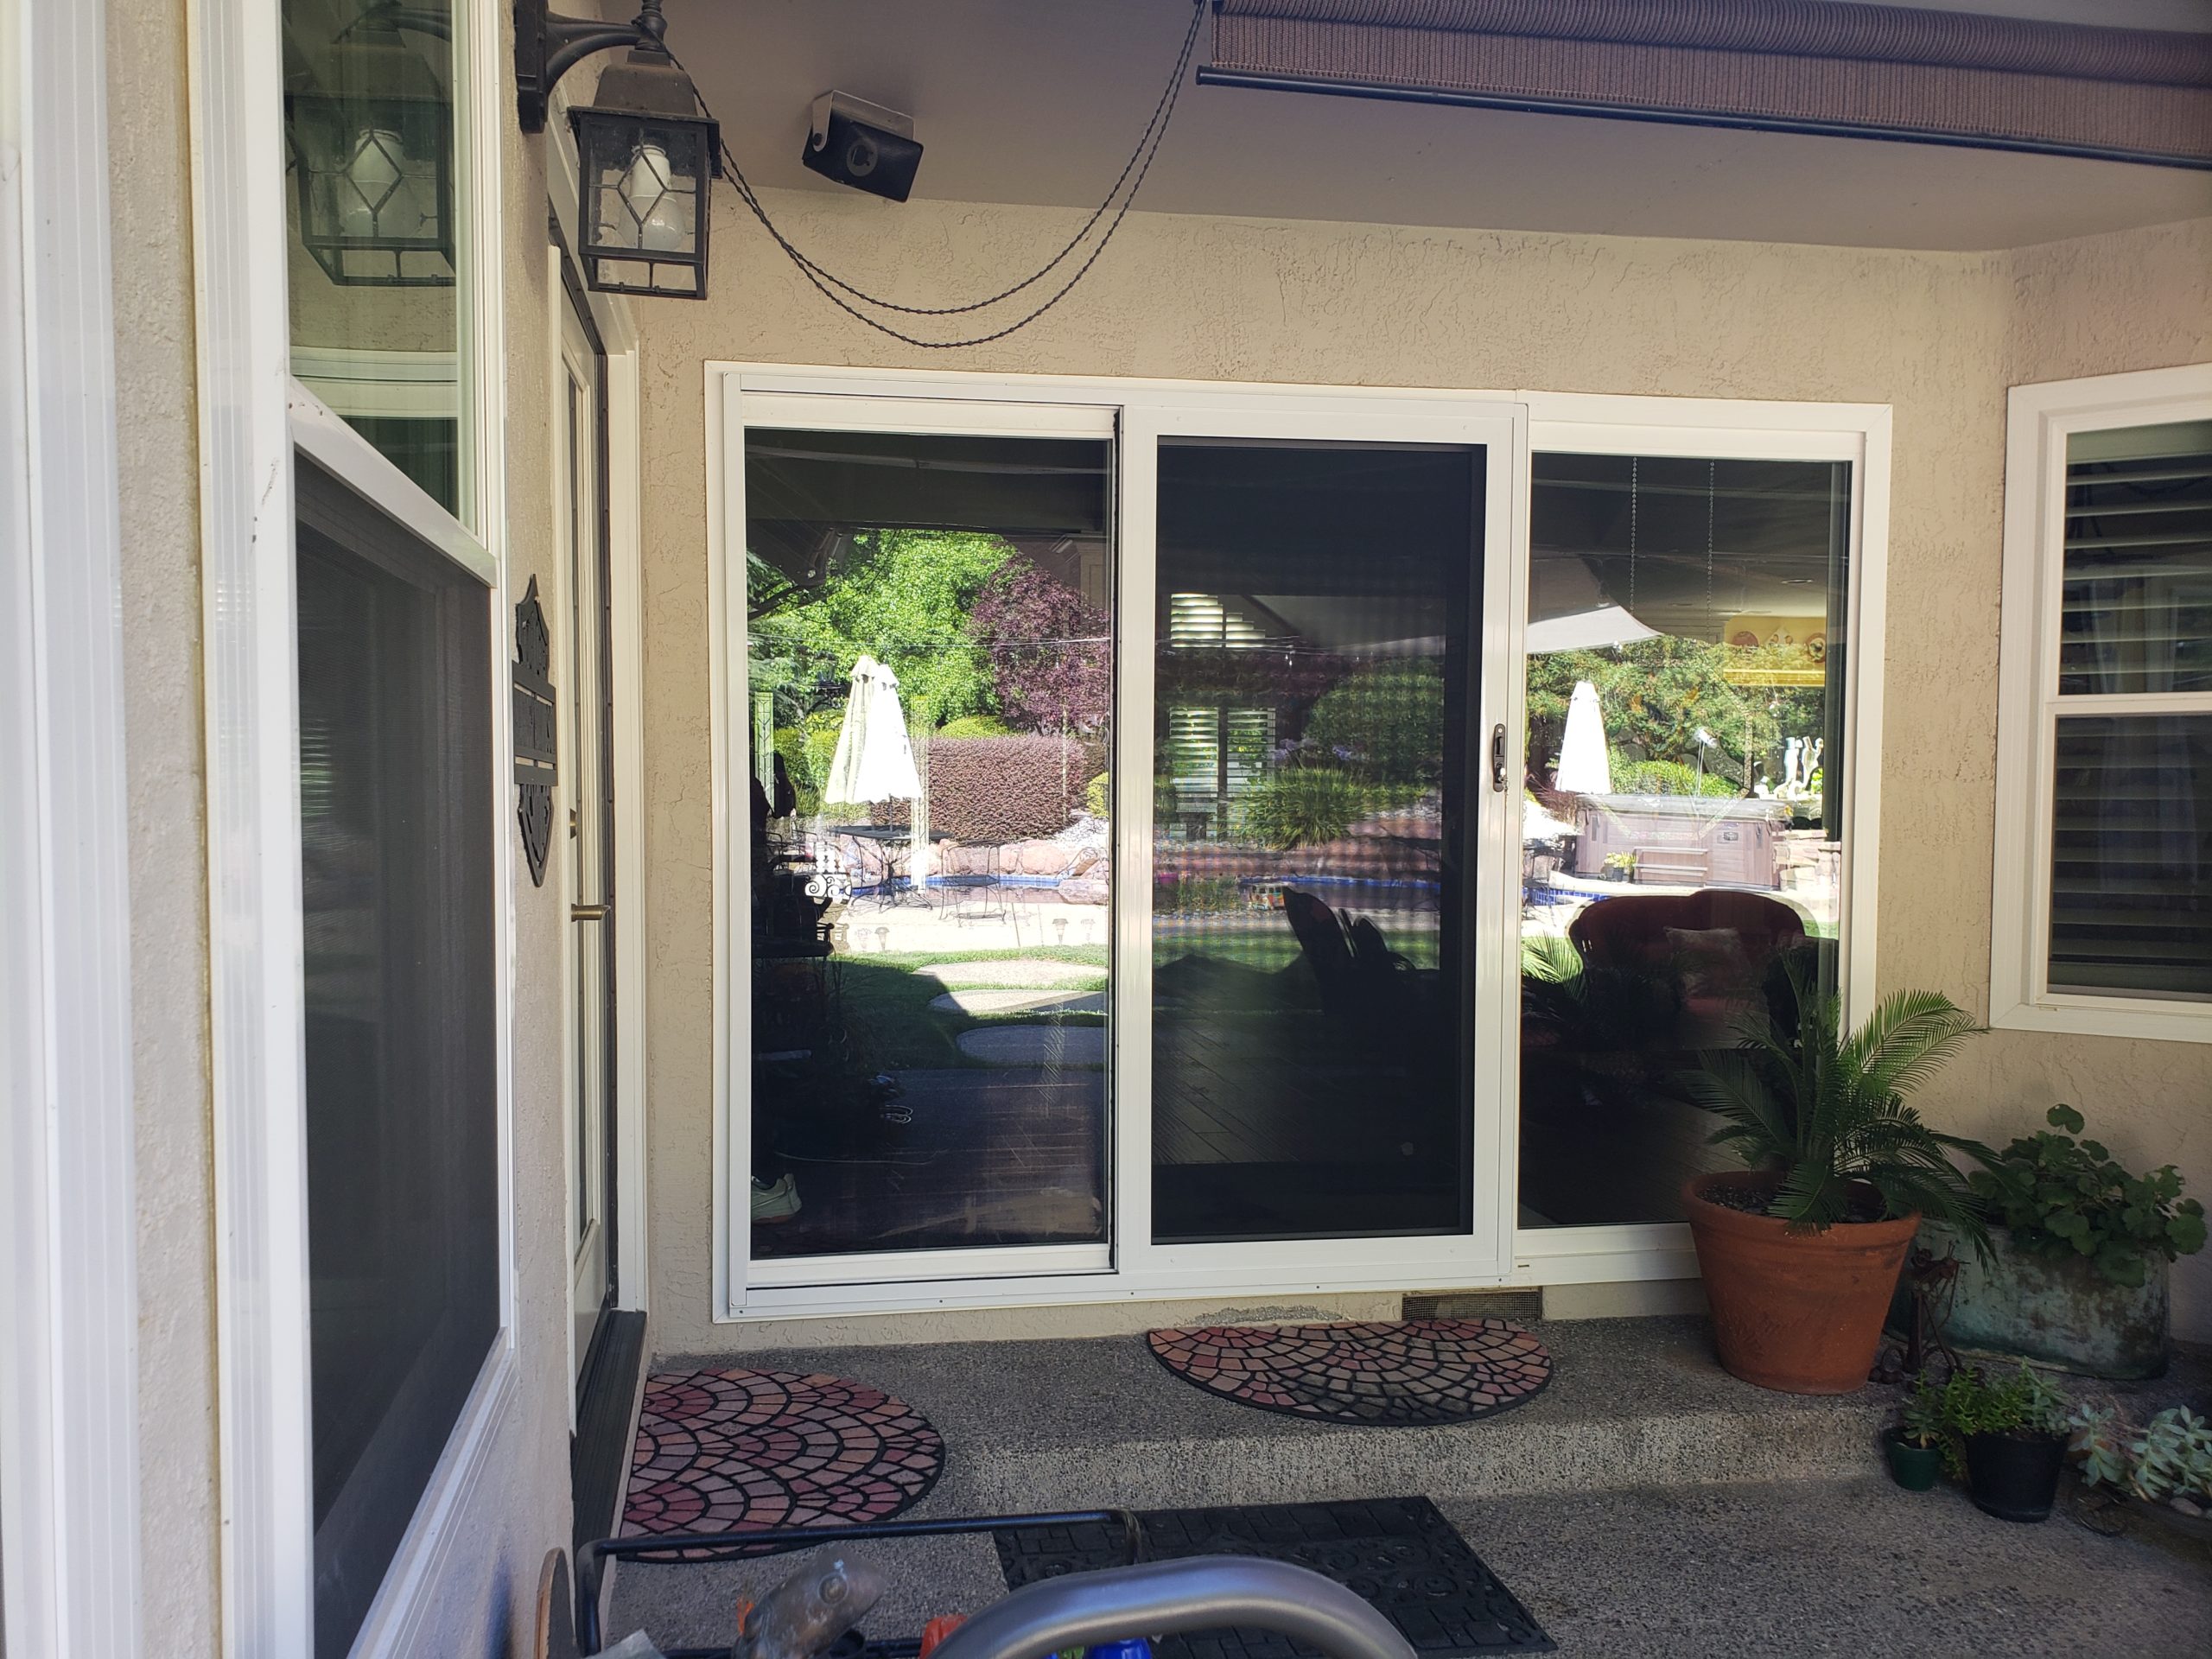 Three sliding security doors we can see a reflection of trees and potted plants in front of doors